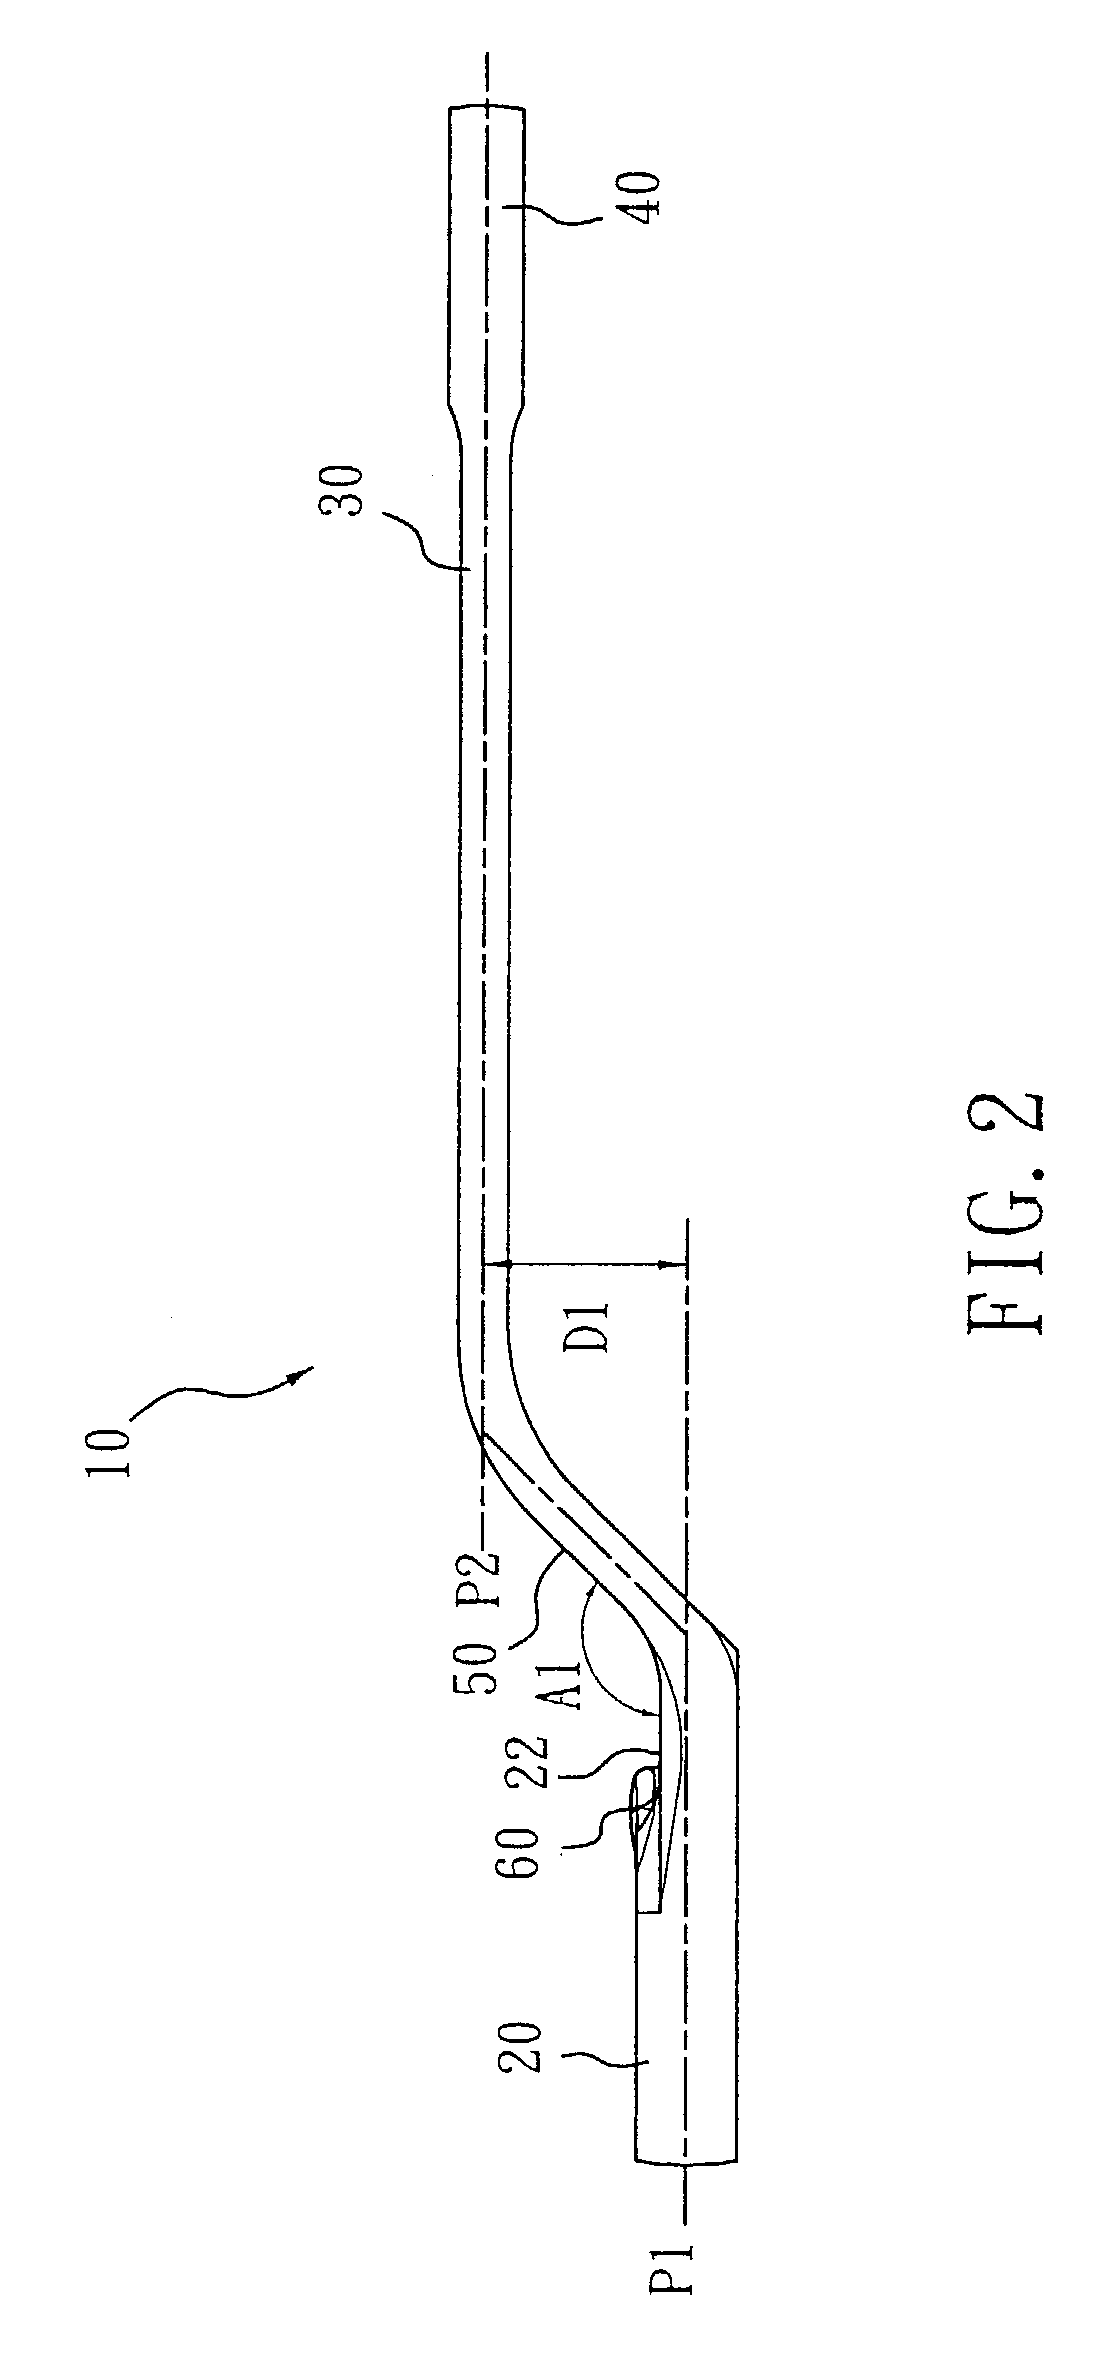 Gear wrench allowing easy force application